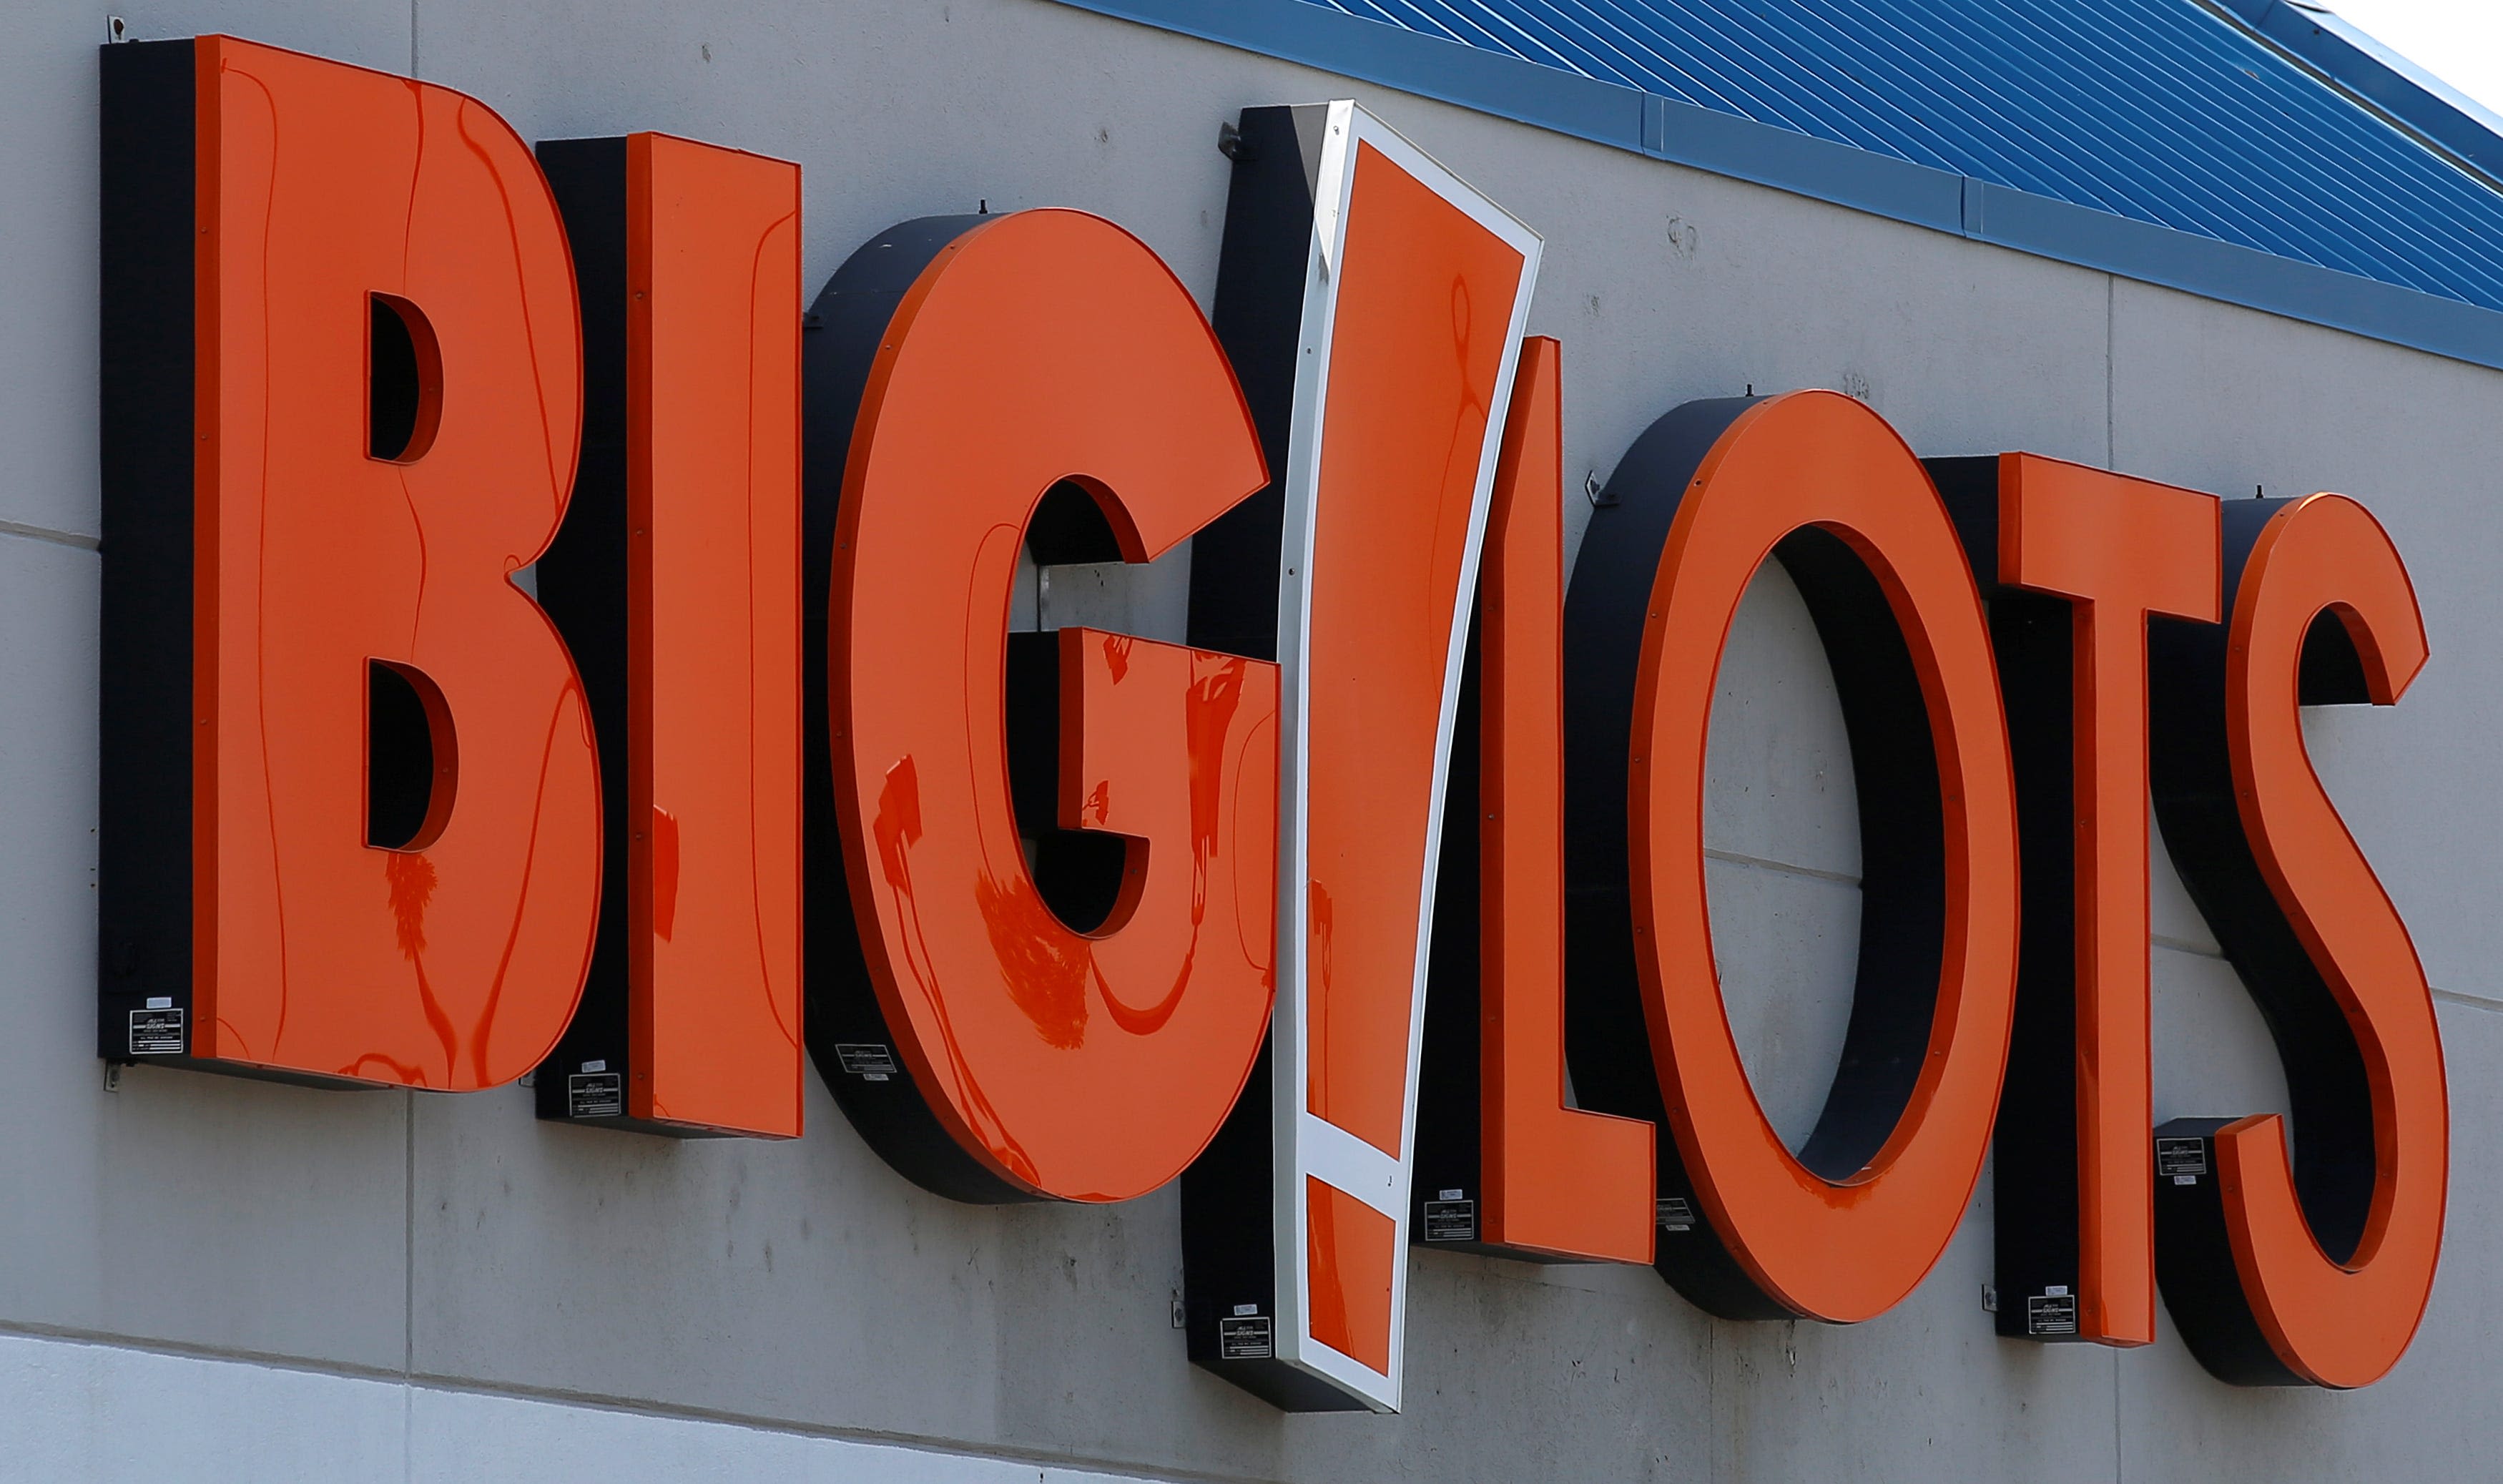 These 48 California Big Lots stores are closing. Here's what to know